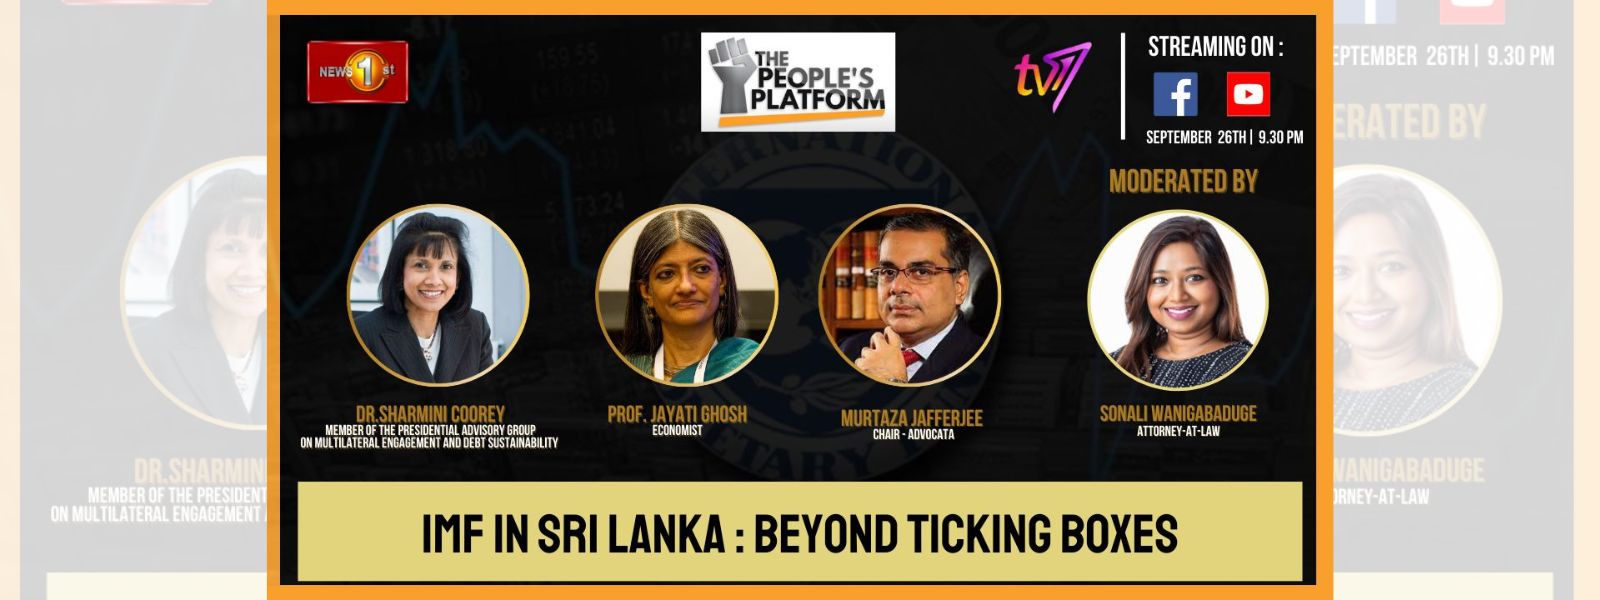 Watch a Special episode of The People’s Platform. IMF in Sri Lanka : Beyond Ticking Boxes